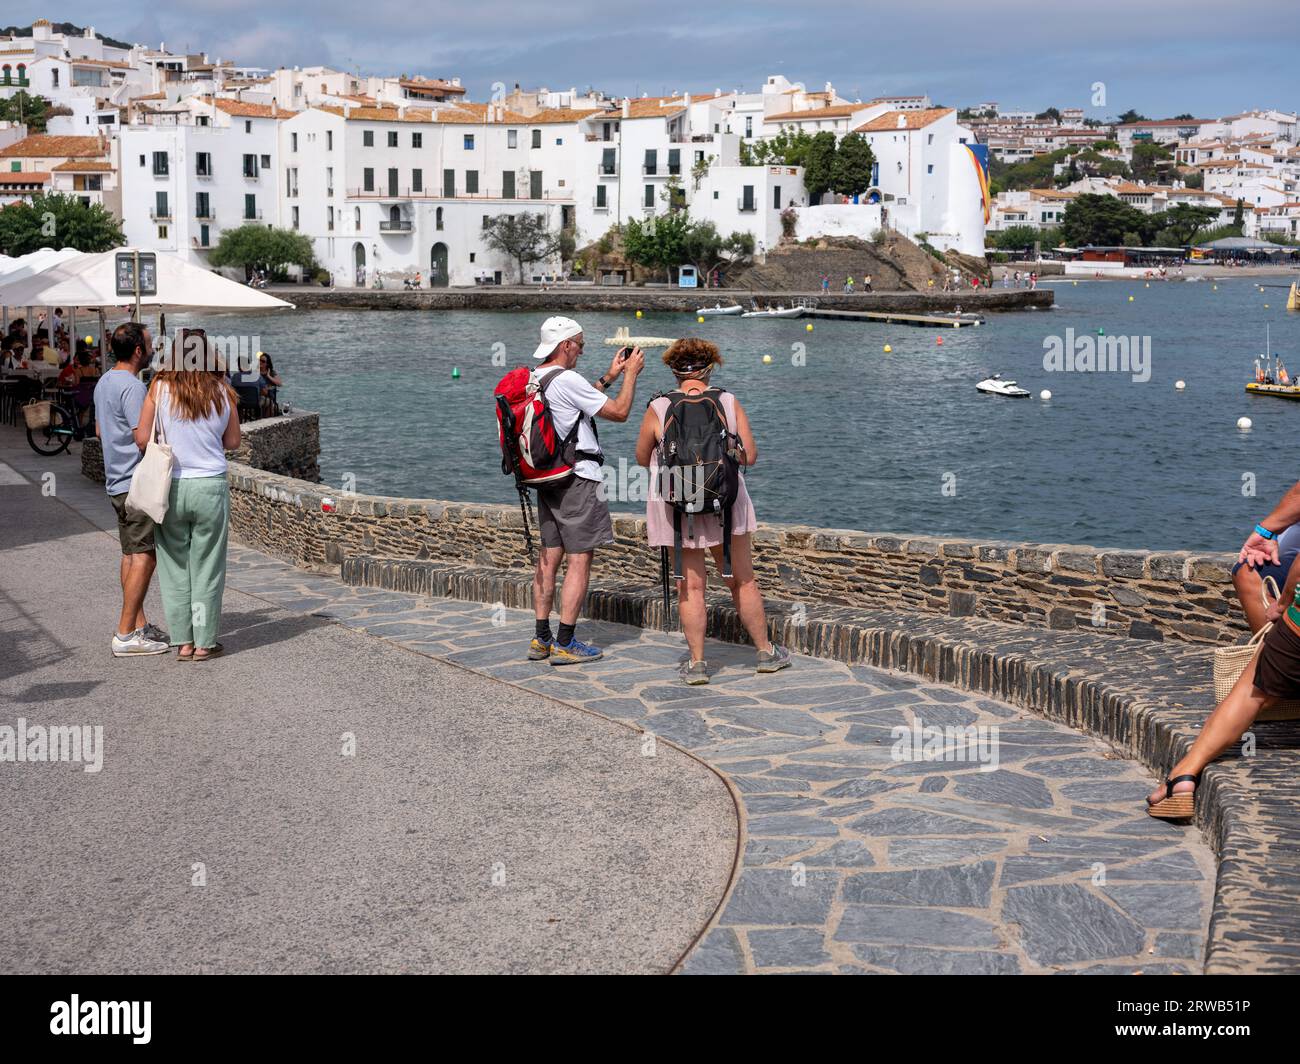 The town of Cadaques in Catalonia, Spain. Stock Photo